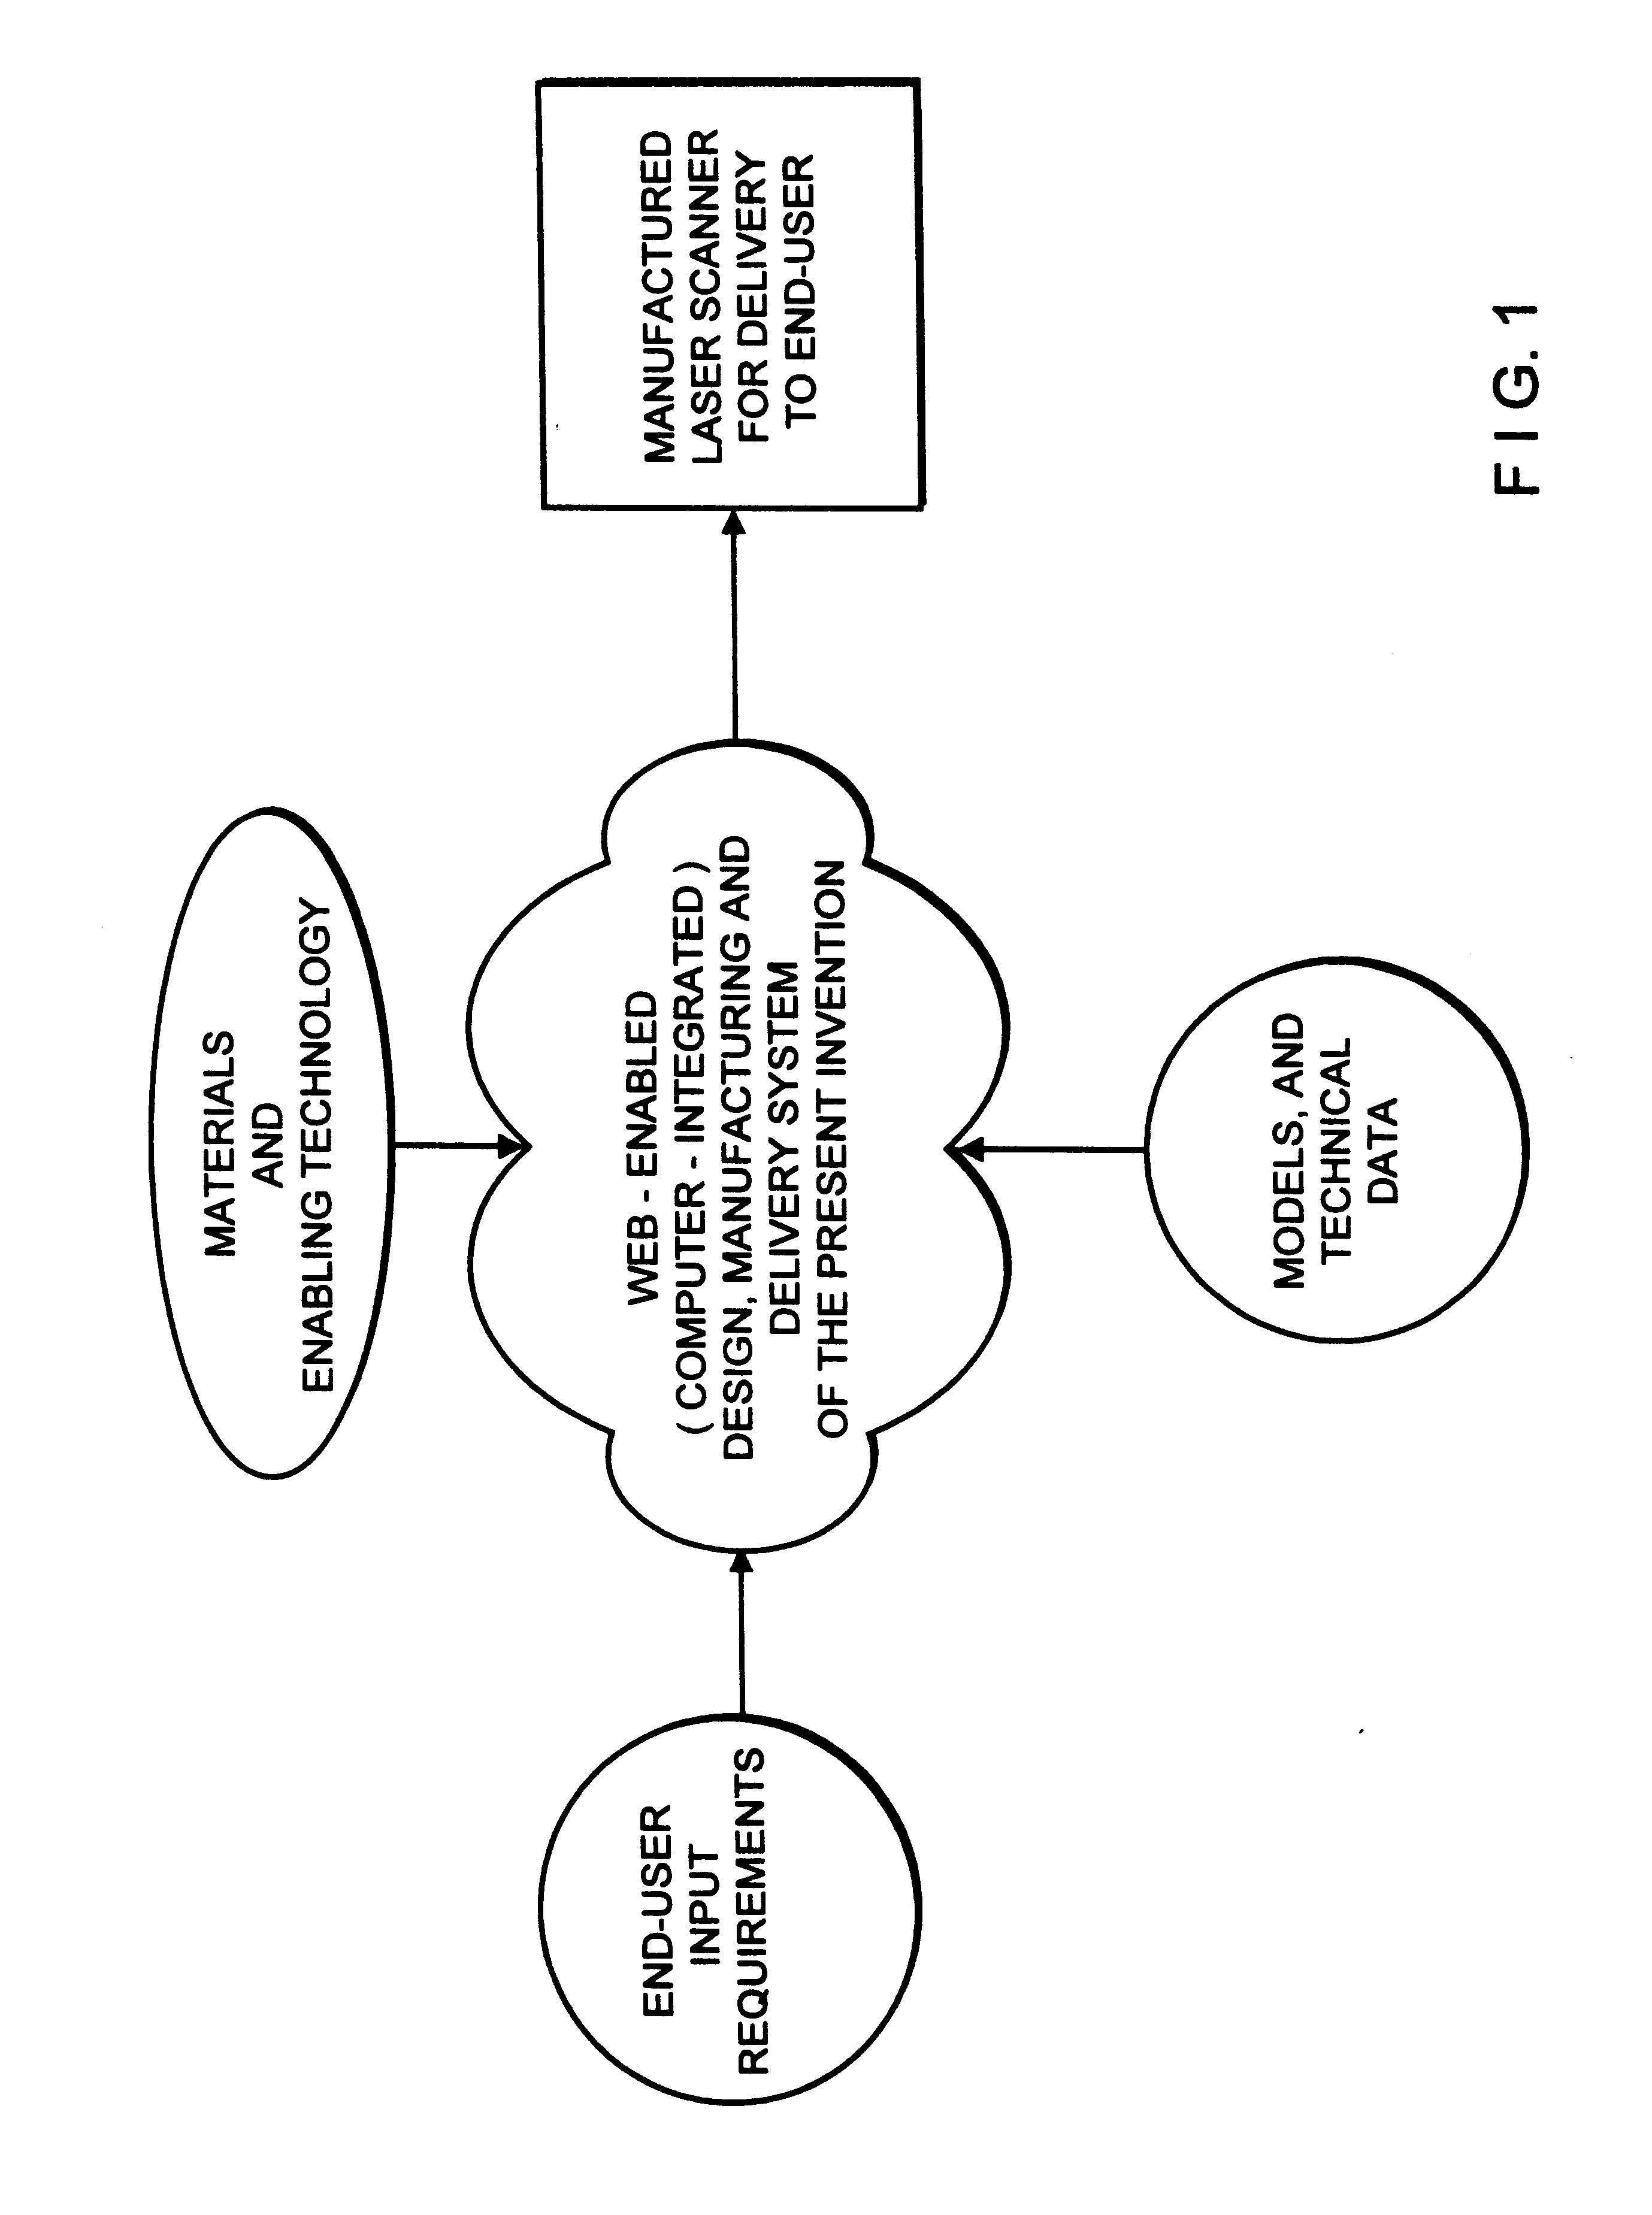 Web-enabled system and method for designing and manufacturing laser scanners